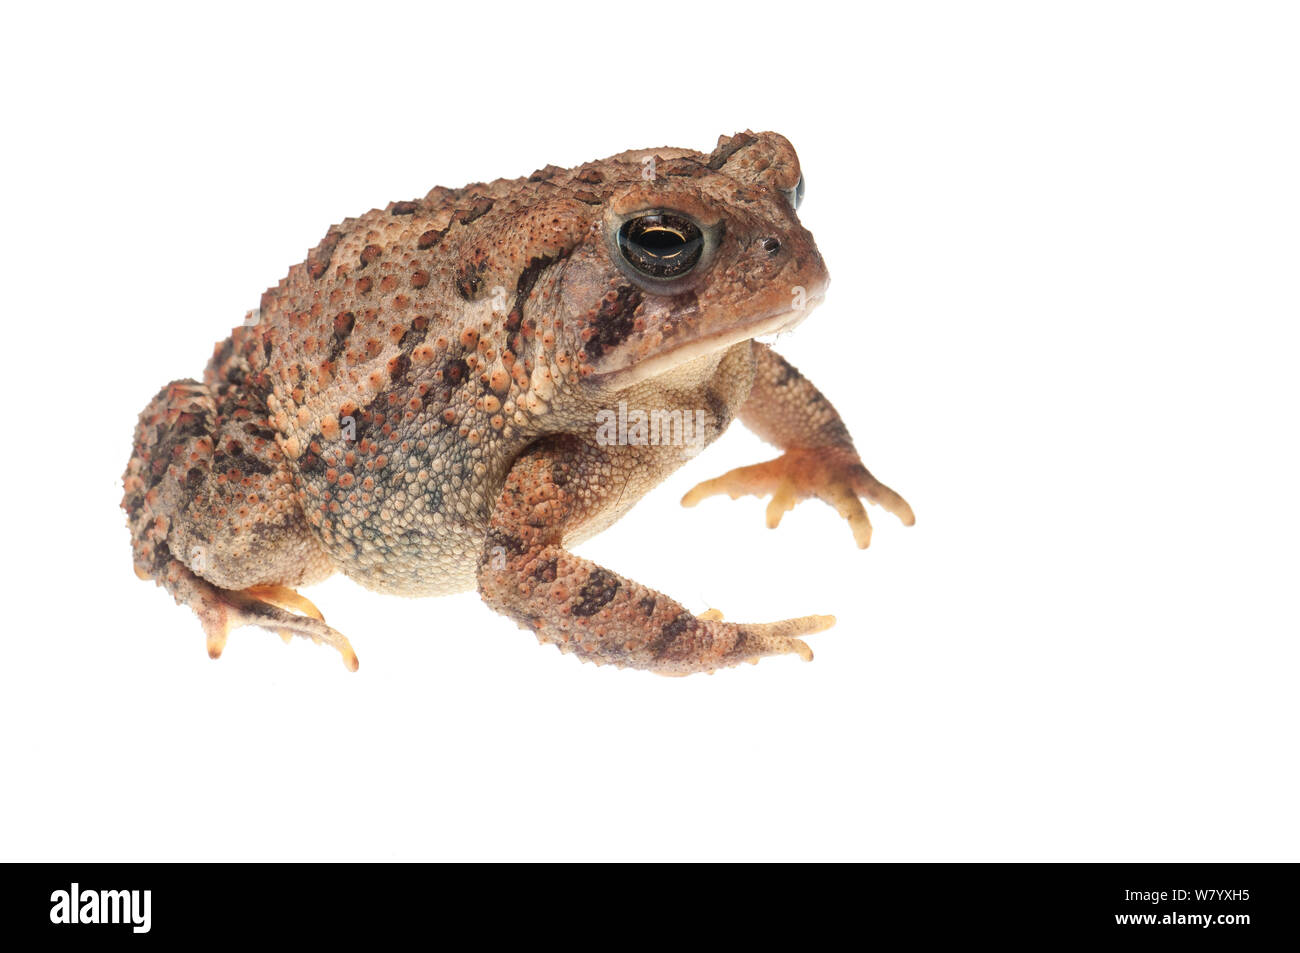 Fowler&# 39;s toad Anaxyrus fowleri) (Oxford, Mississippi, USA, avril. Projet d'Meetyourneighbors.net Banque D'Images